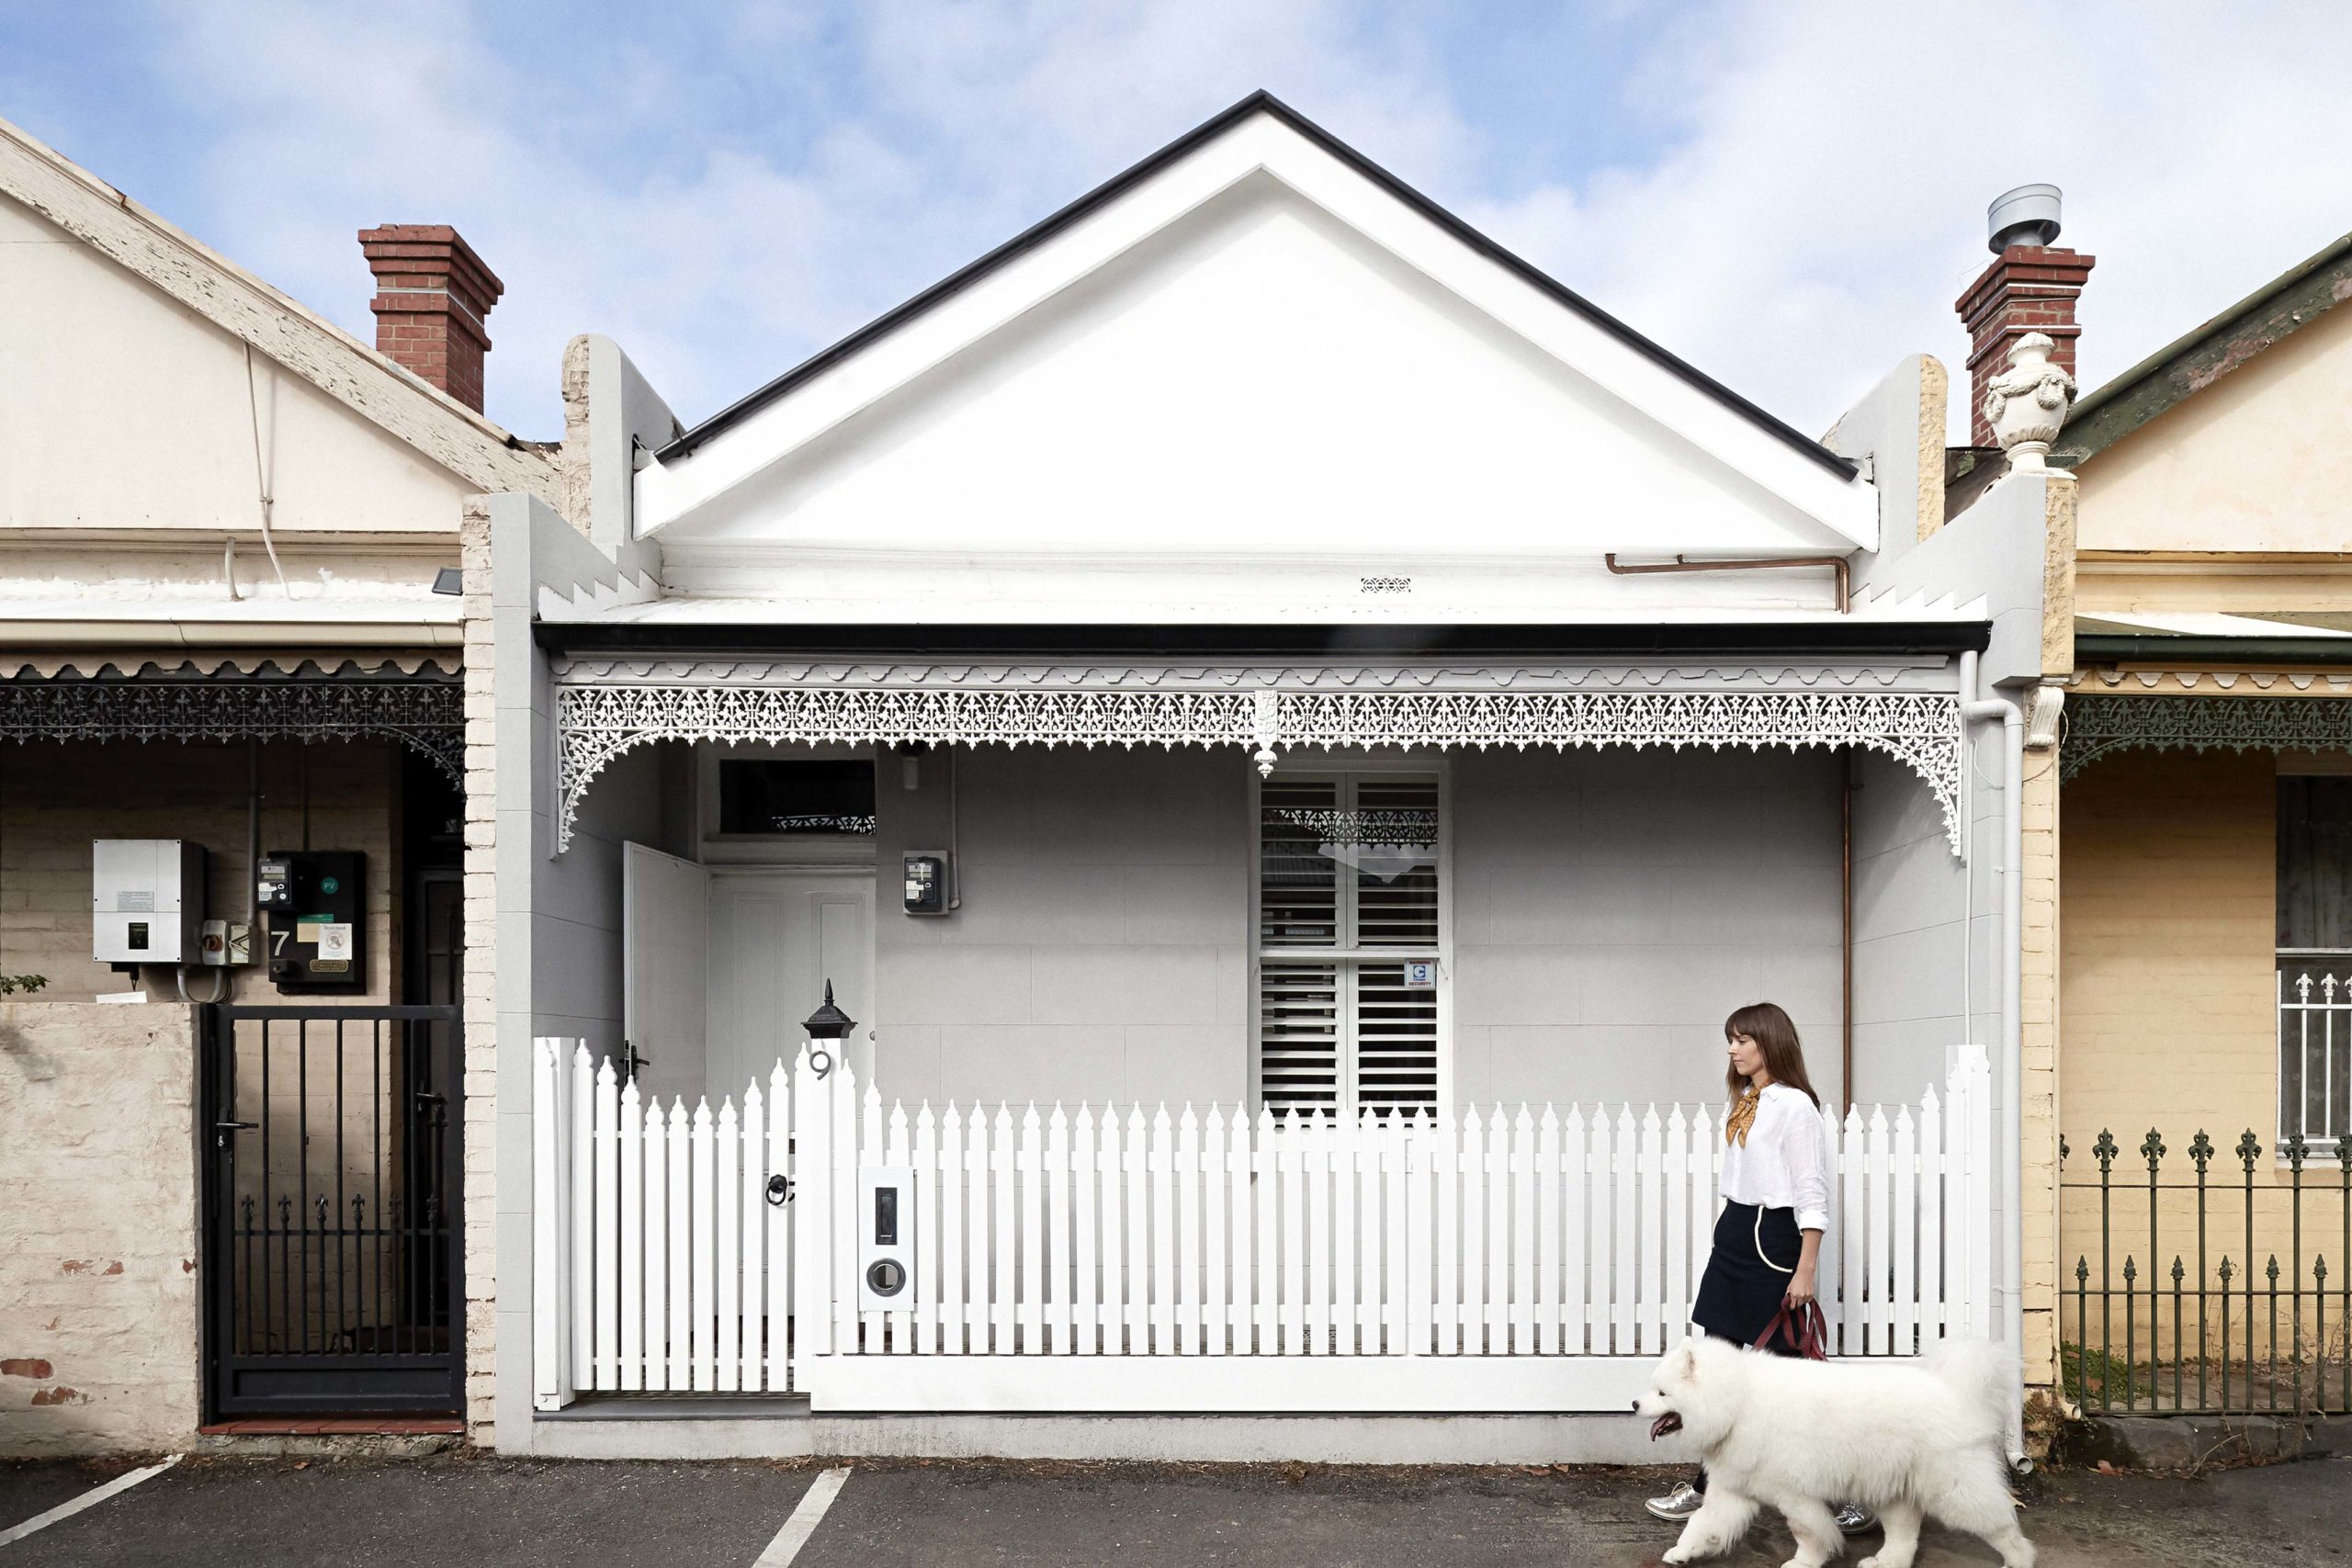 White miniature terraced house with picket fence in Melbourne, Australia